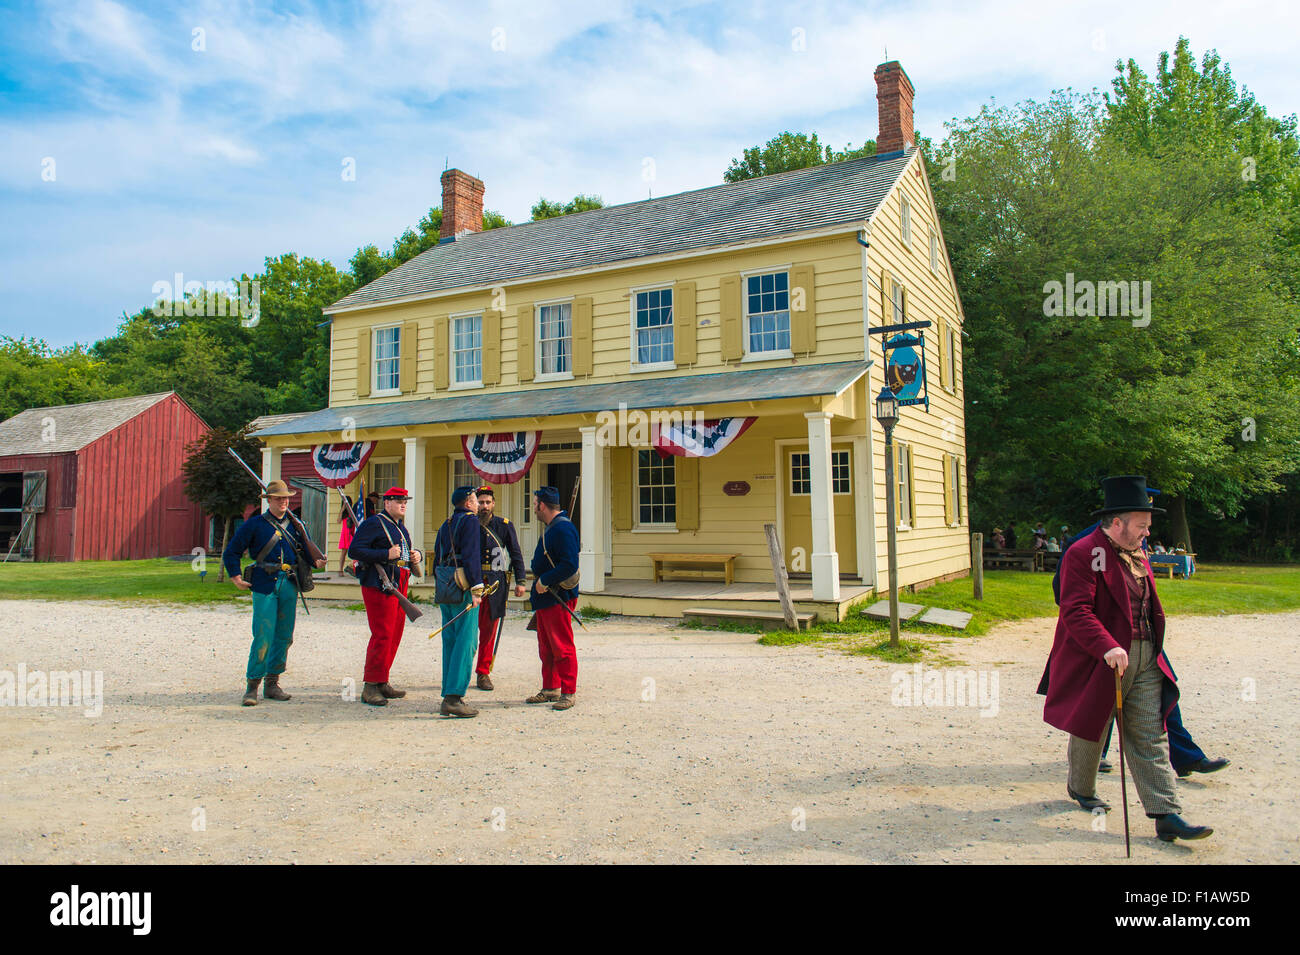 Old Bethpage, New York, USA. 30th August, 2015. A 19th Century gentleman wearing a top hat, and American Civil War soldiers from the 14th Brooklyn Regiment (14th New York State Militia) AKA The Brooklyn Chasseurs, are portrayed in front of the yellow Noon Inn tavern during the Old Time Music Weekend at the Old Bethpage Village Restoration. During their historical reenactments, members of the non-profit 14th Brooklyn Company E wear reproductions of 'The 'Red Legged Devils' original Union army uniform. Credit:  Ann E Parry/Alamy Live News Stock Photo